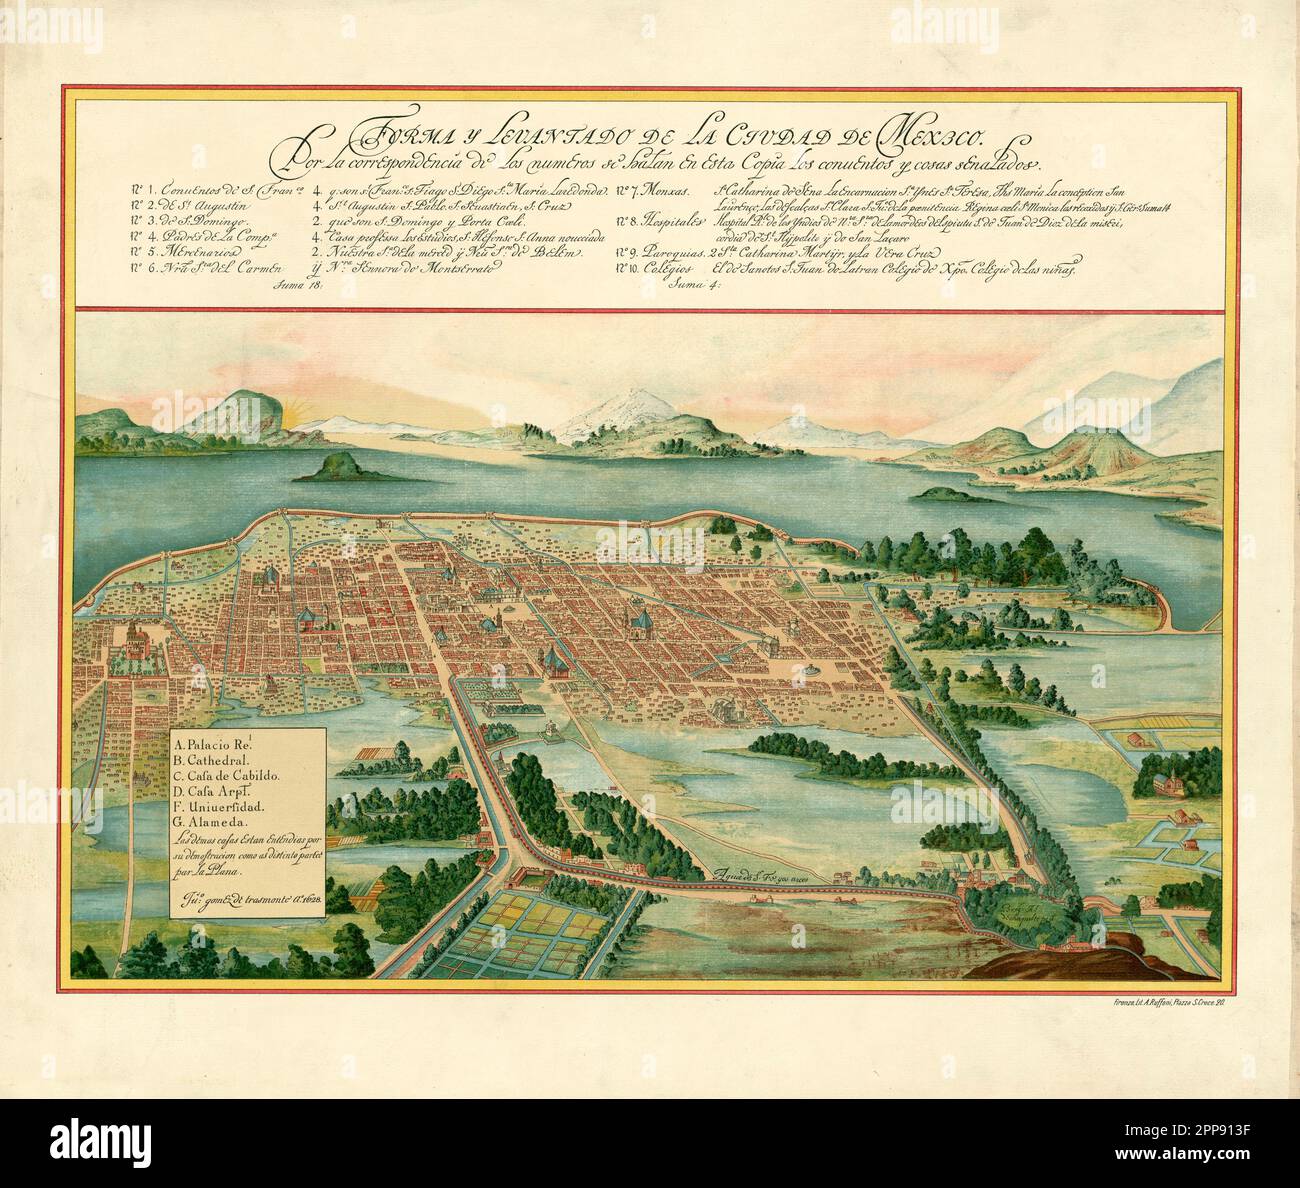 Vintage aerial view plan of Mexico City and surroundings including Lake Texcoco and volcanoes, by Juan Gomez de Trasmonte di Ao  c. 1628 Stock Photo